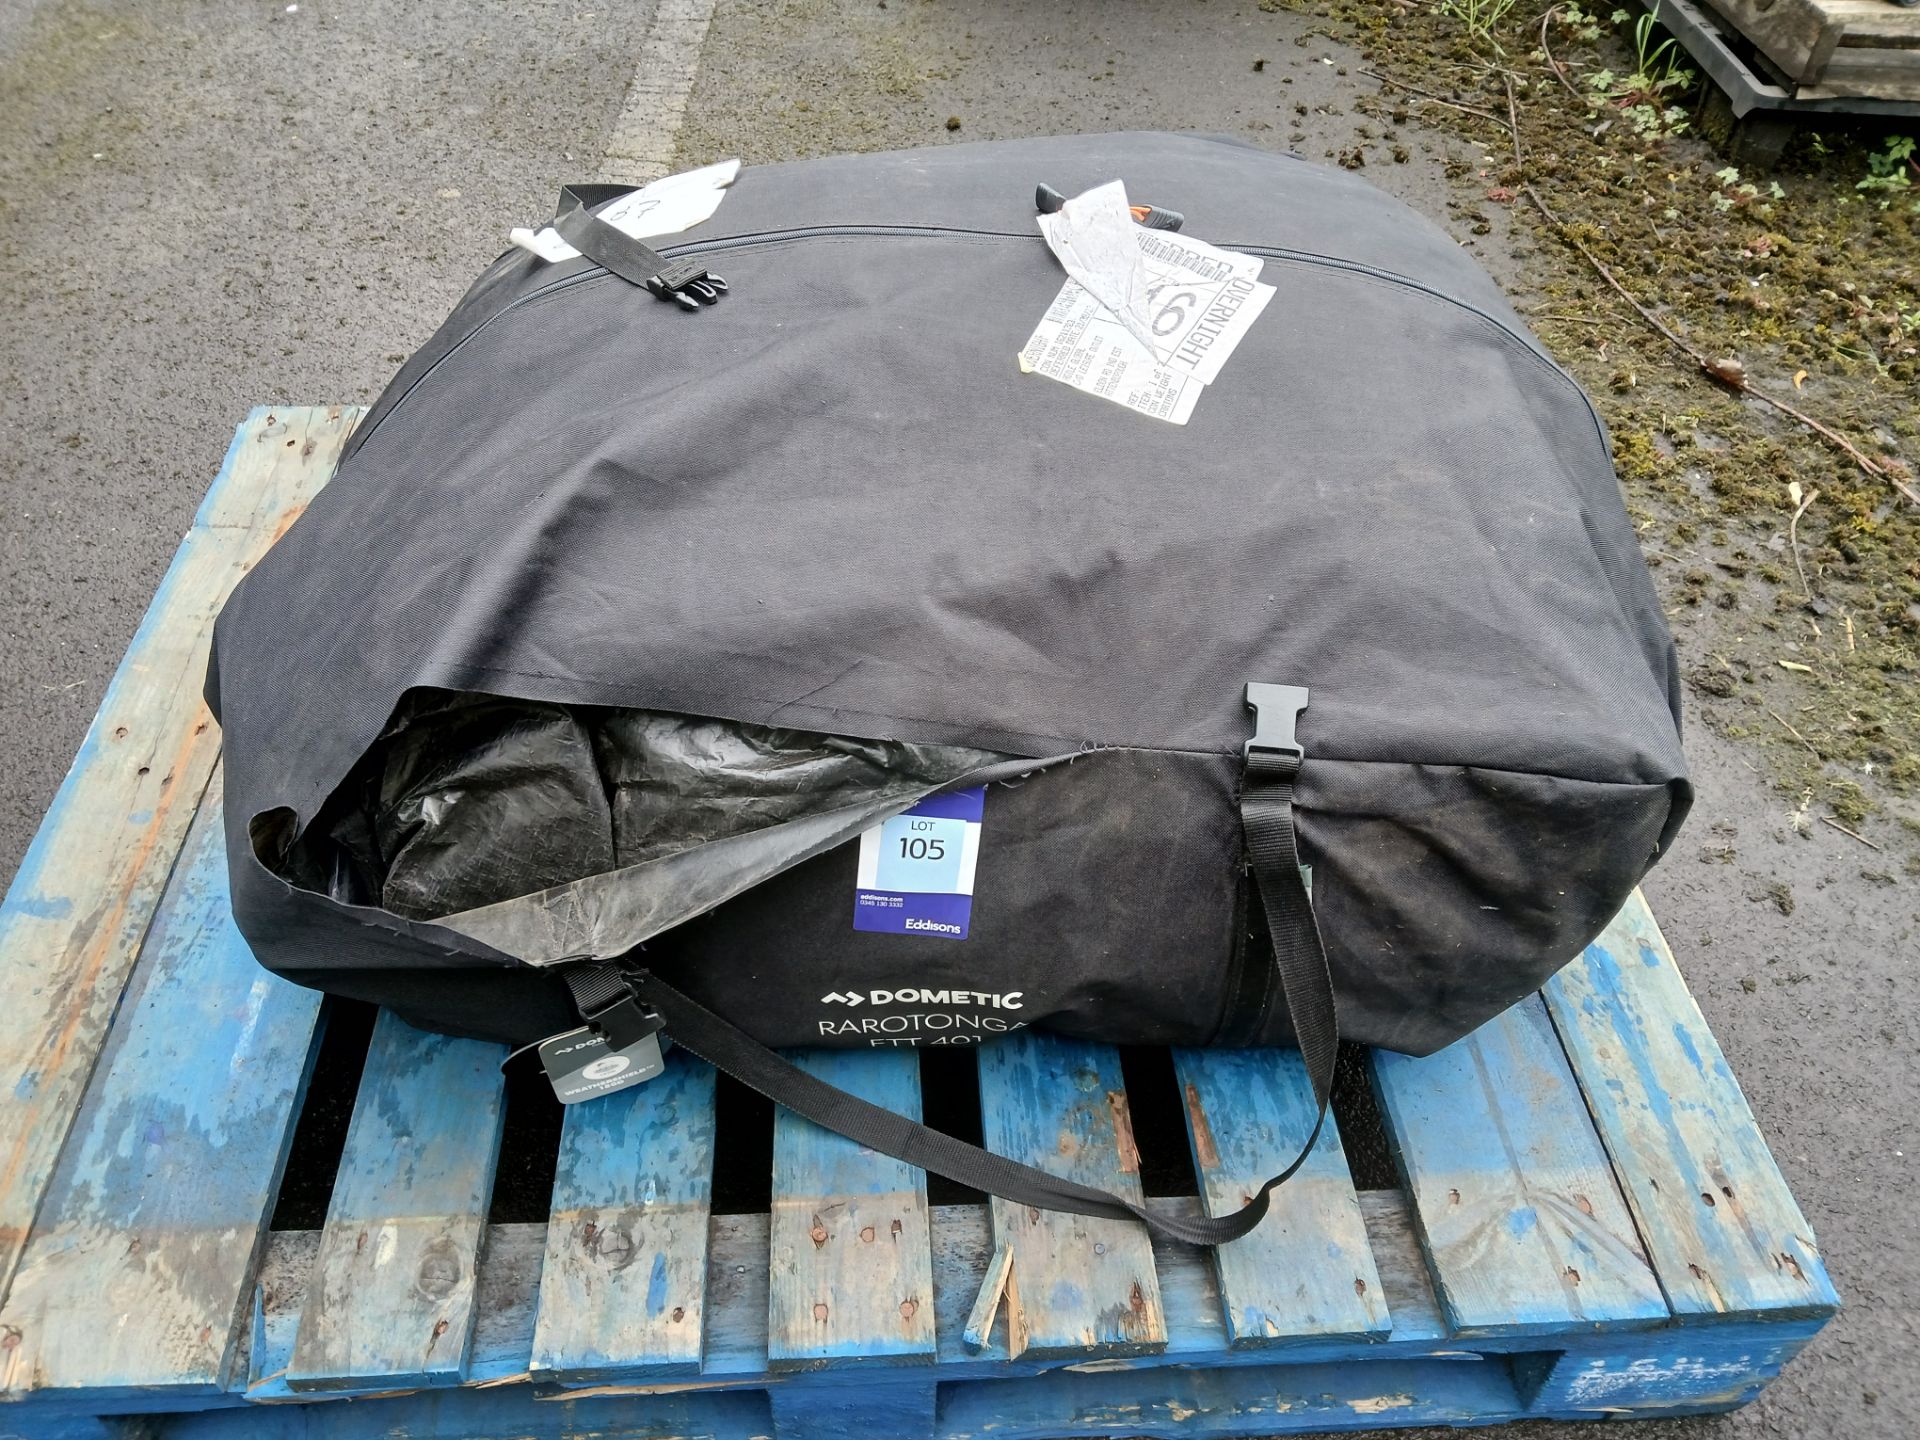 Dometic Rarotonga FTT401 Tent (Please note, Viewing Strongly Recommended - Eddisons have not